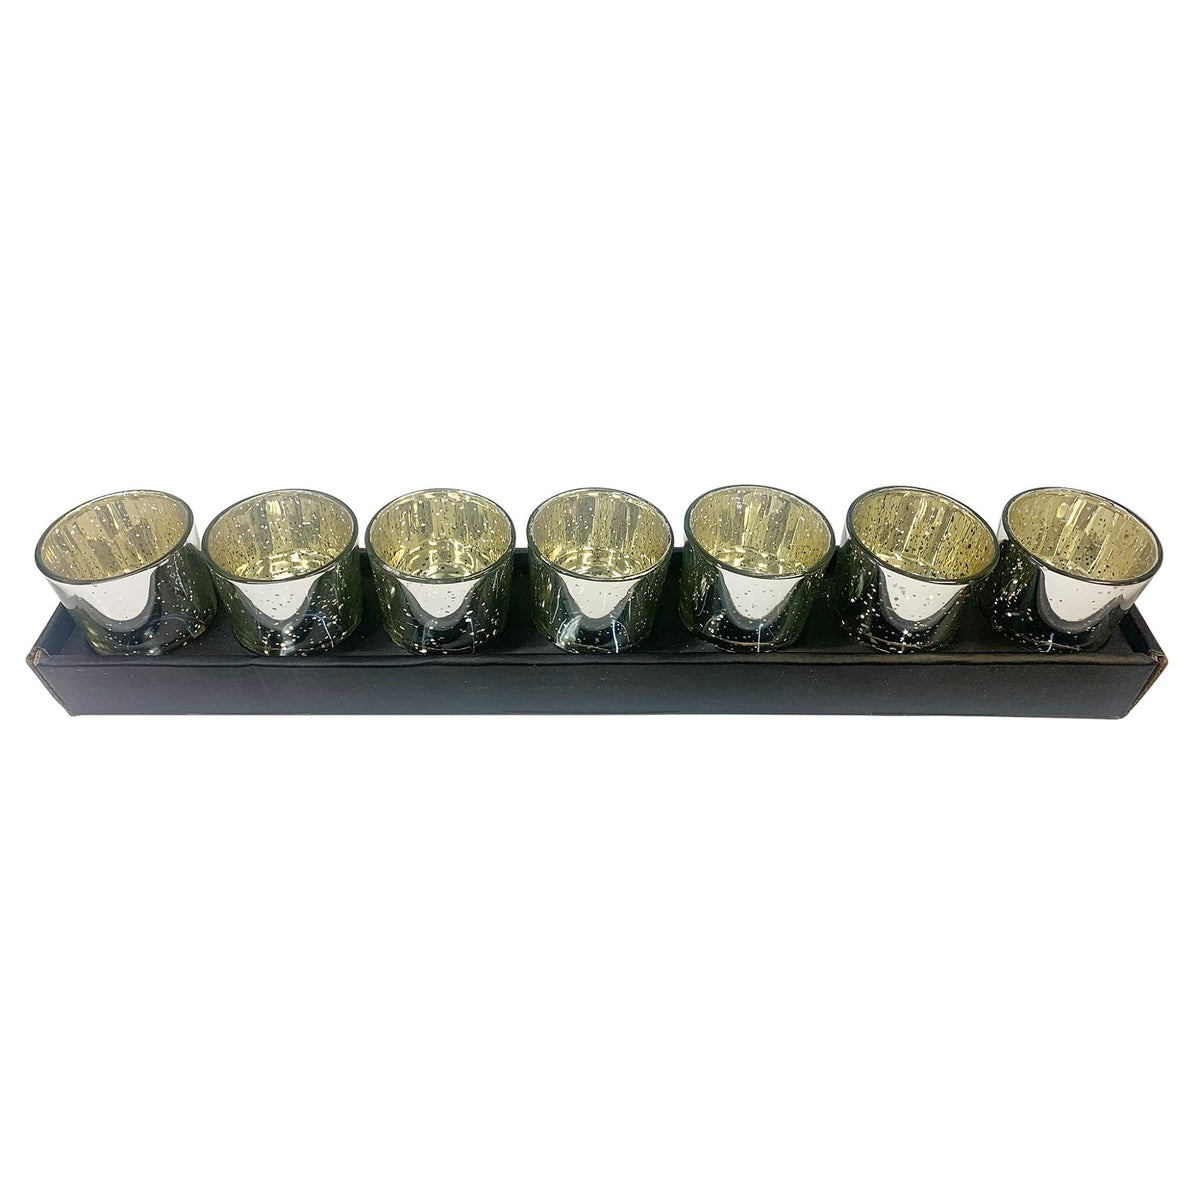 HOSLEY®  Glass Tea Light Candle Holder, Metallic Silver Finish, Set of 7,  2.65inches High each